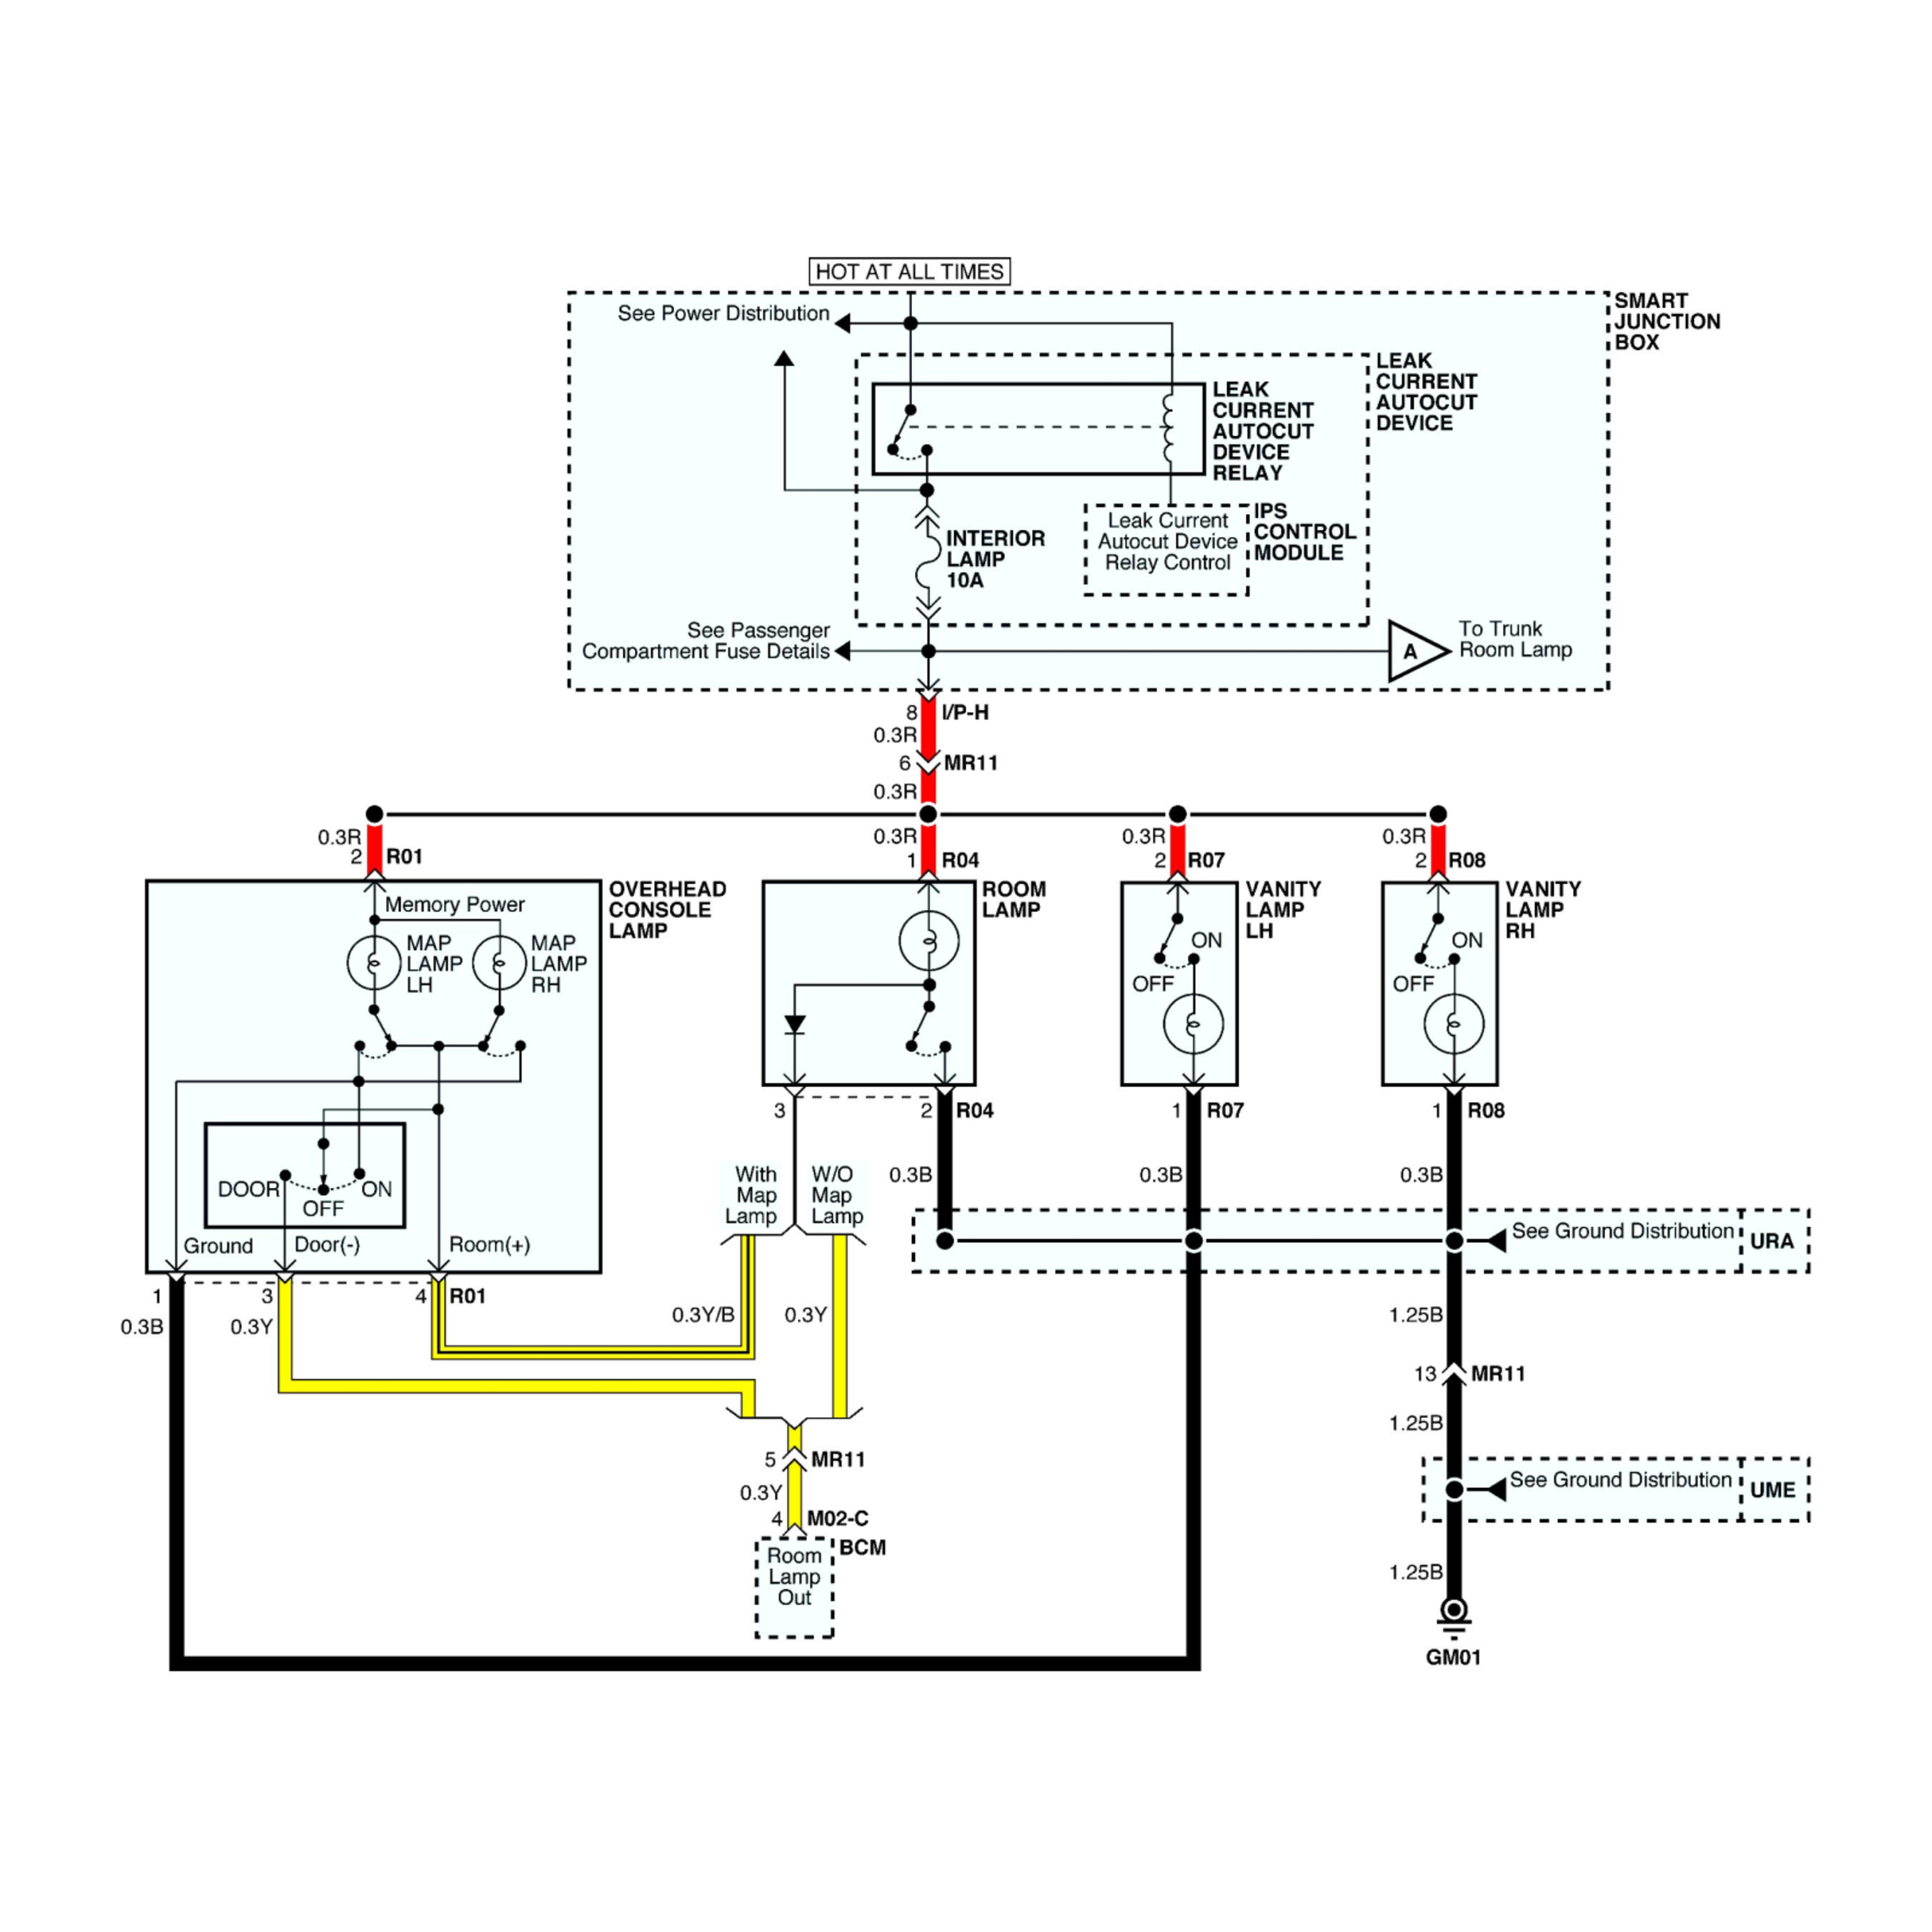 2010 Lincoln MKS wiring diagrams example